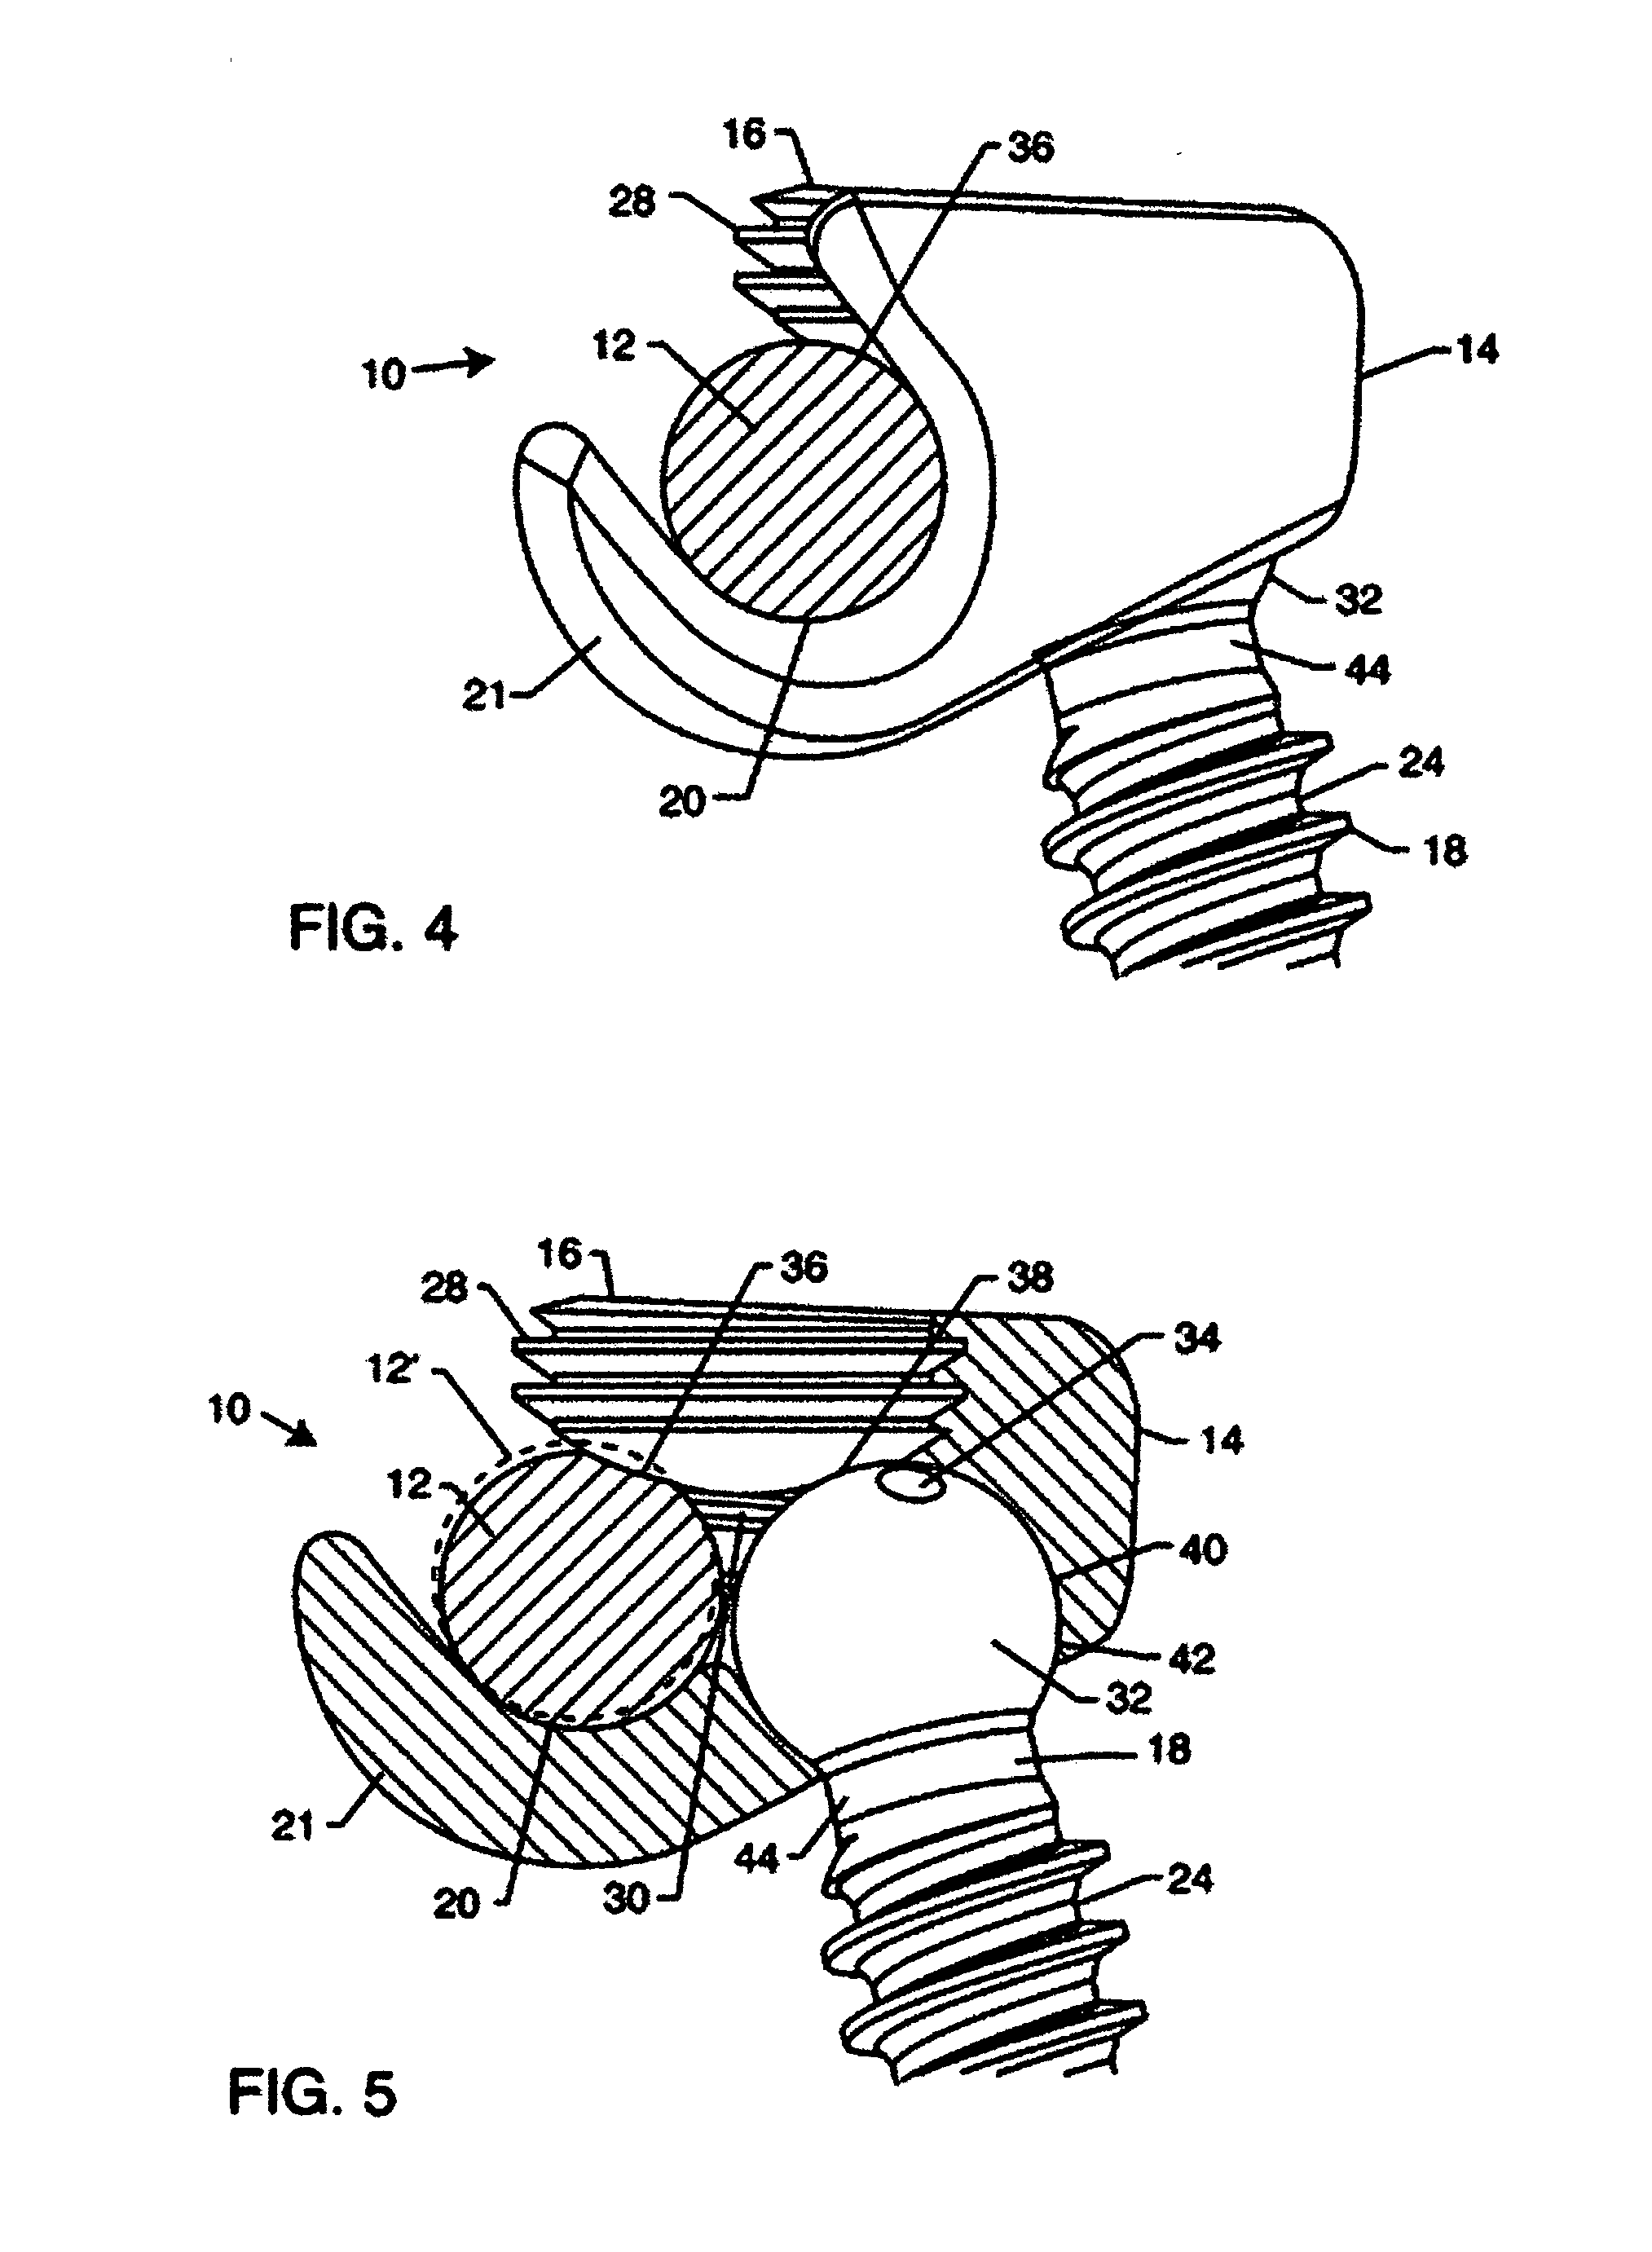 Pedicle screw system with offset stabilizer rod